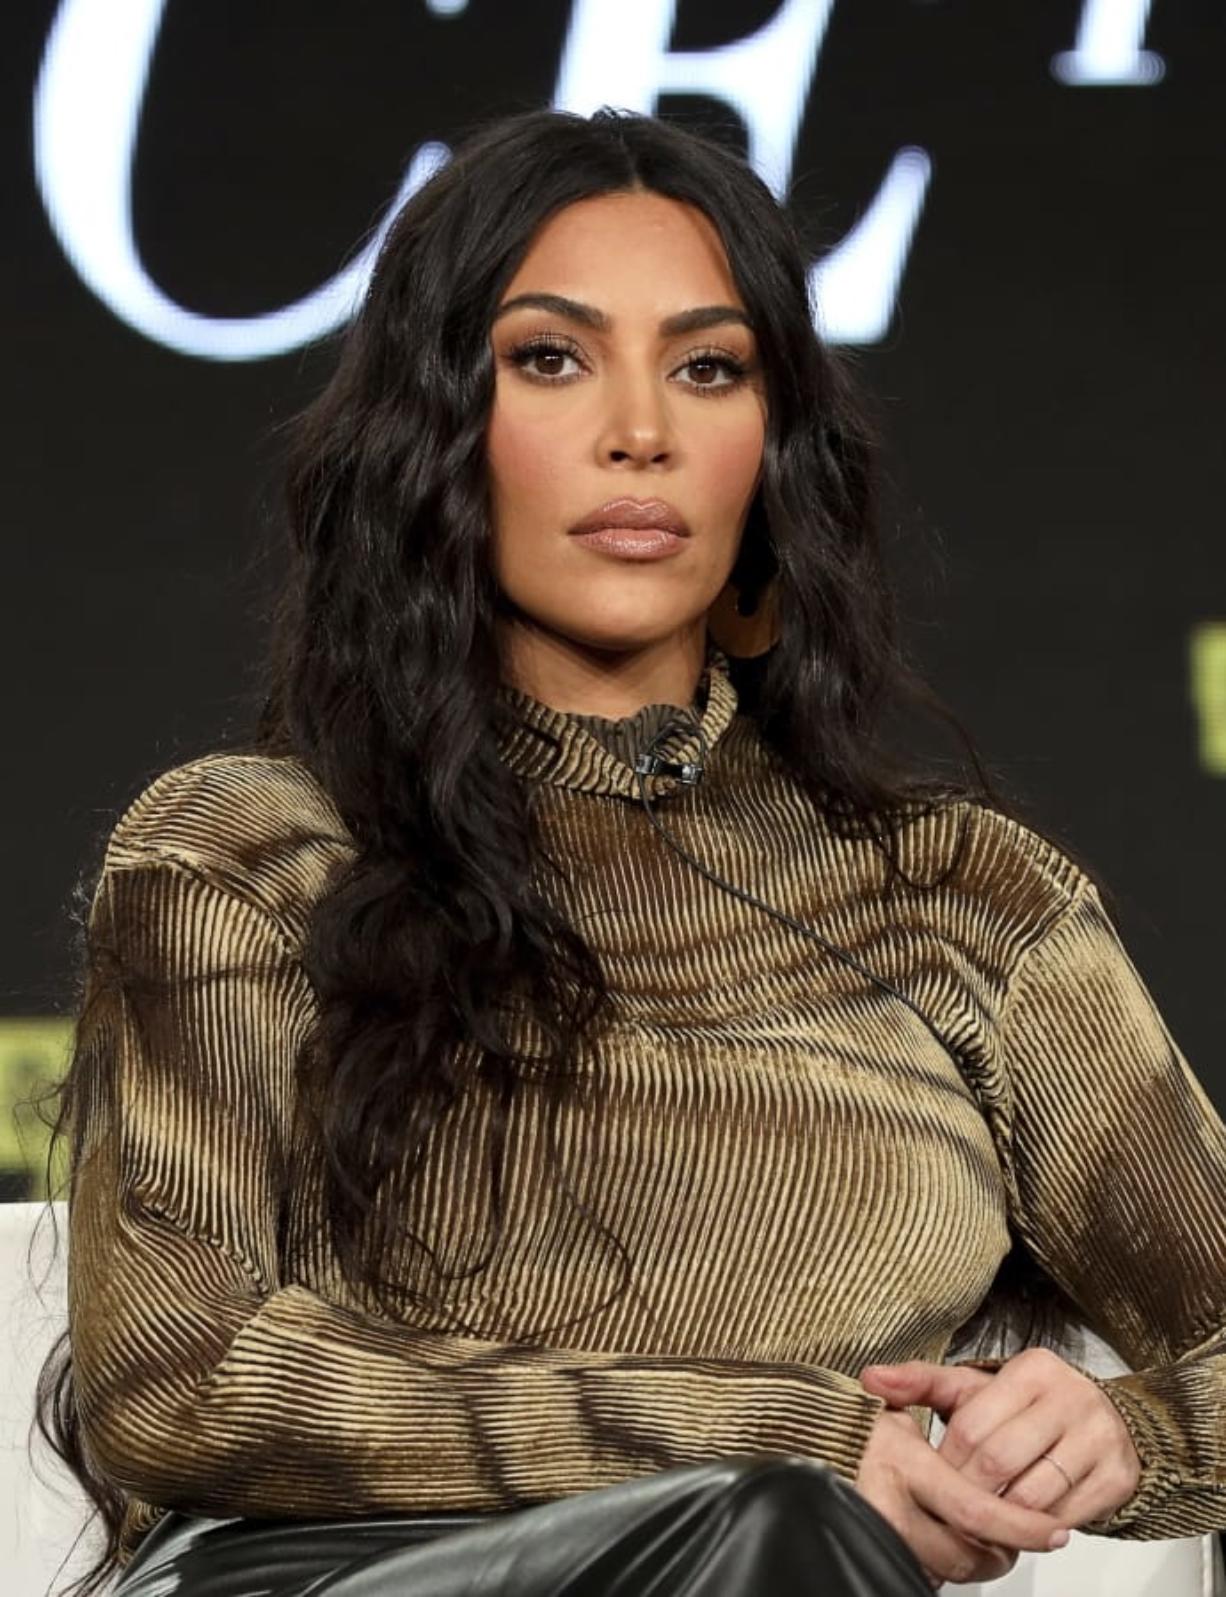 FILE - In this Saturday, Jan. 18, 2020 file photo, Kim Kardashian West speaks at the &quot;Kim Kardashian West: The Justice Project&quot; panel during the Oxygen TCA 2020 Winter Press Tour at the Langham Huntington, in Pasadena, Calif.  Celebrities including Kim Kardashian West, Katy Perry and Leonardo DiCaprio are taking part in a 24-hour &quot;freeze&quot; Wednesday, Sept. 16, 2020 on Instagram to protest against the failure of the social media platform&#039;s parent company, Facebook, to tackle misinformation and hateful content.